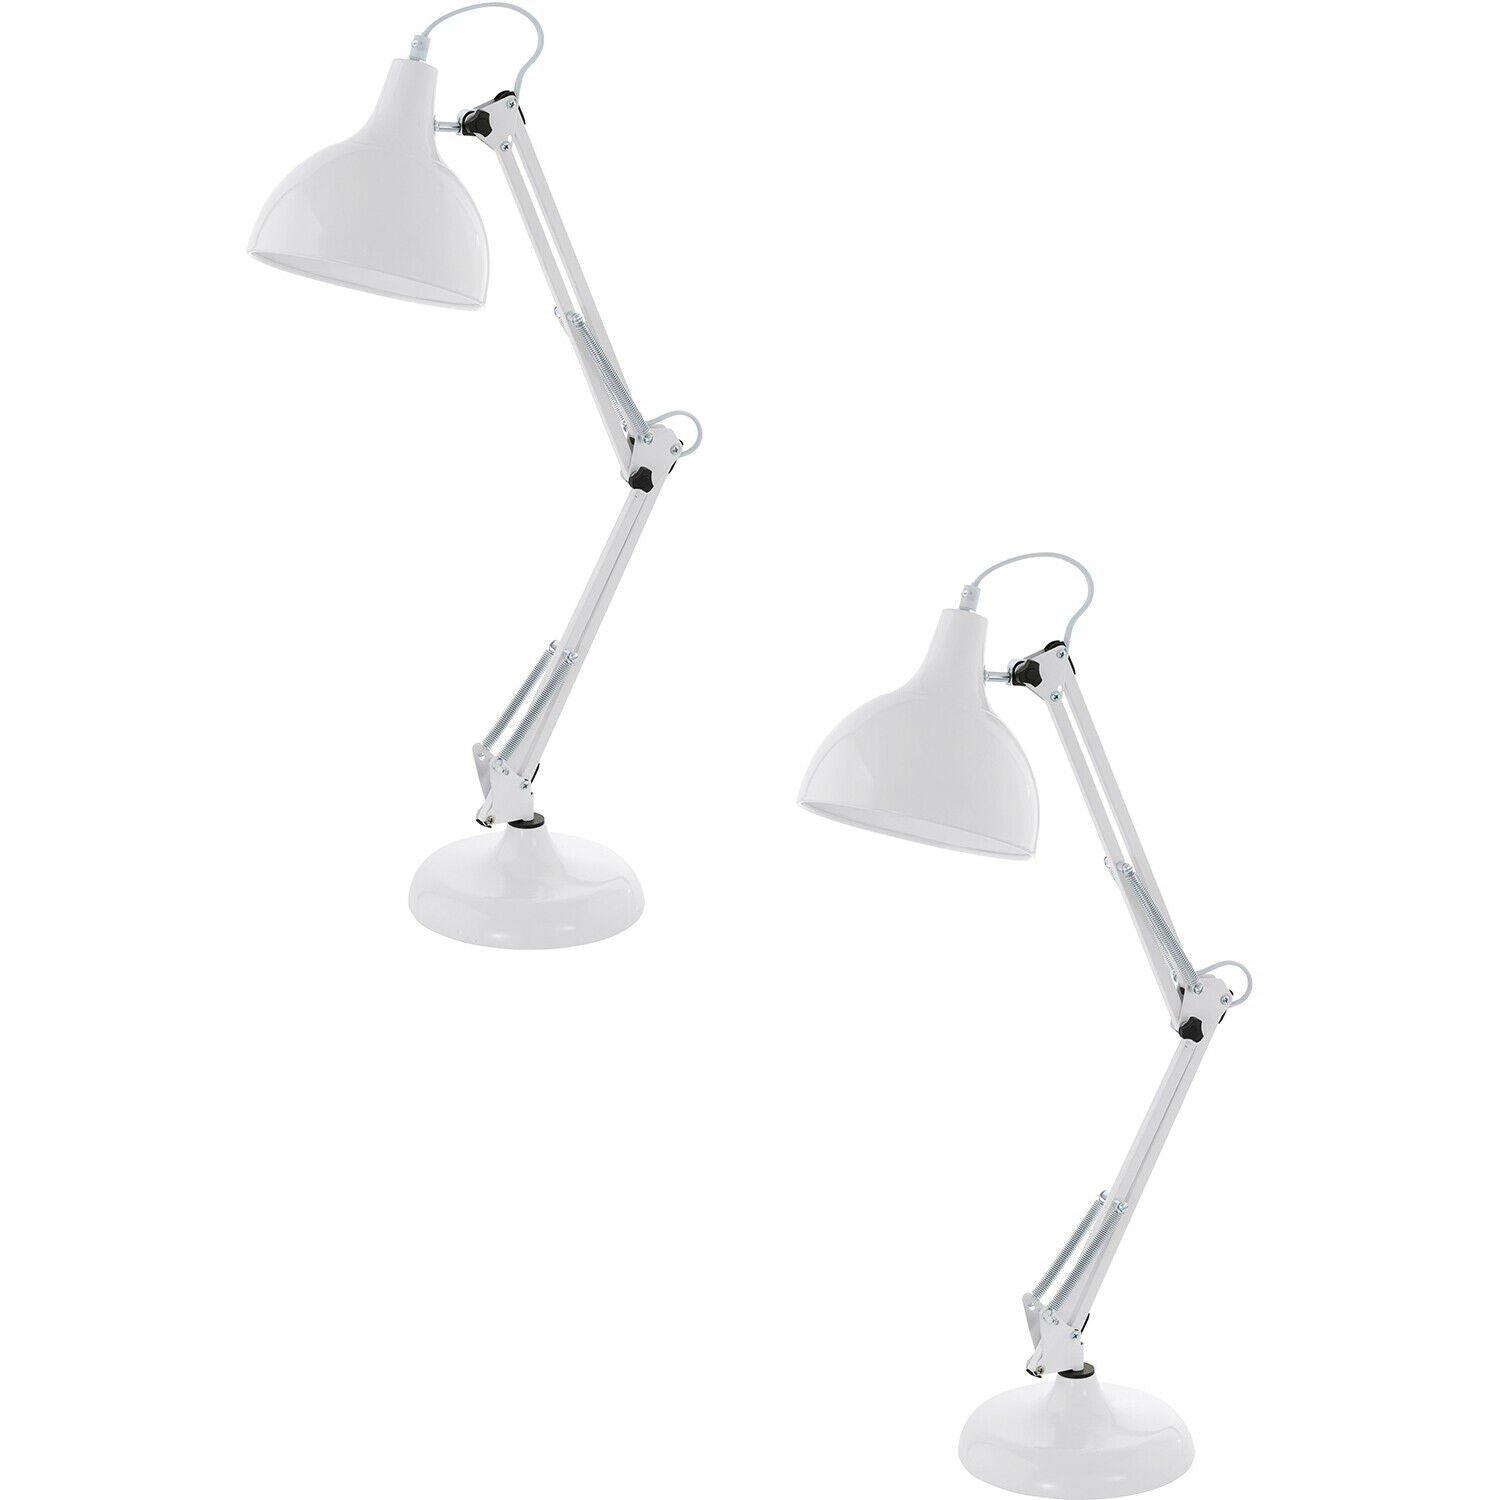 2 PACK Table Desk Lamp Adjustable Colour White Flexible In Line Switch E27 40W